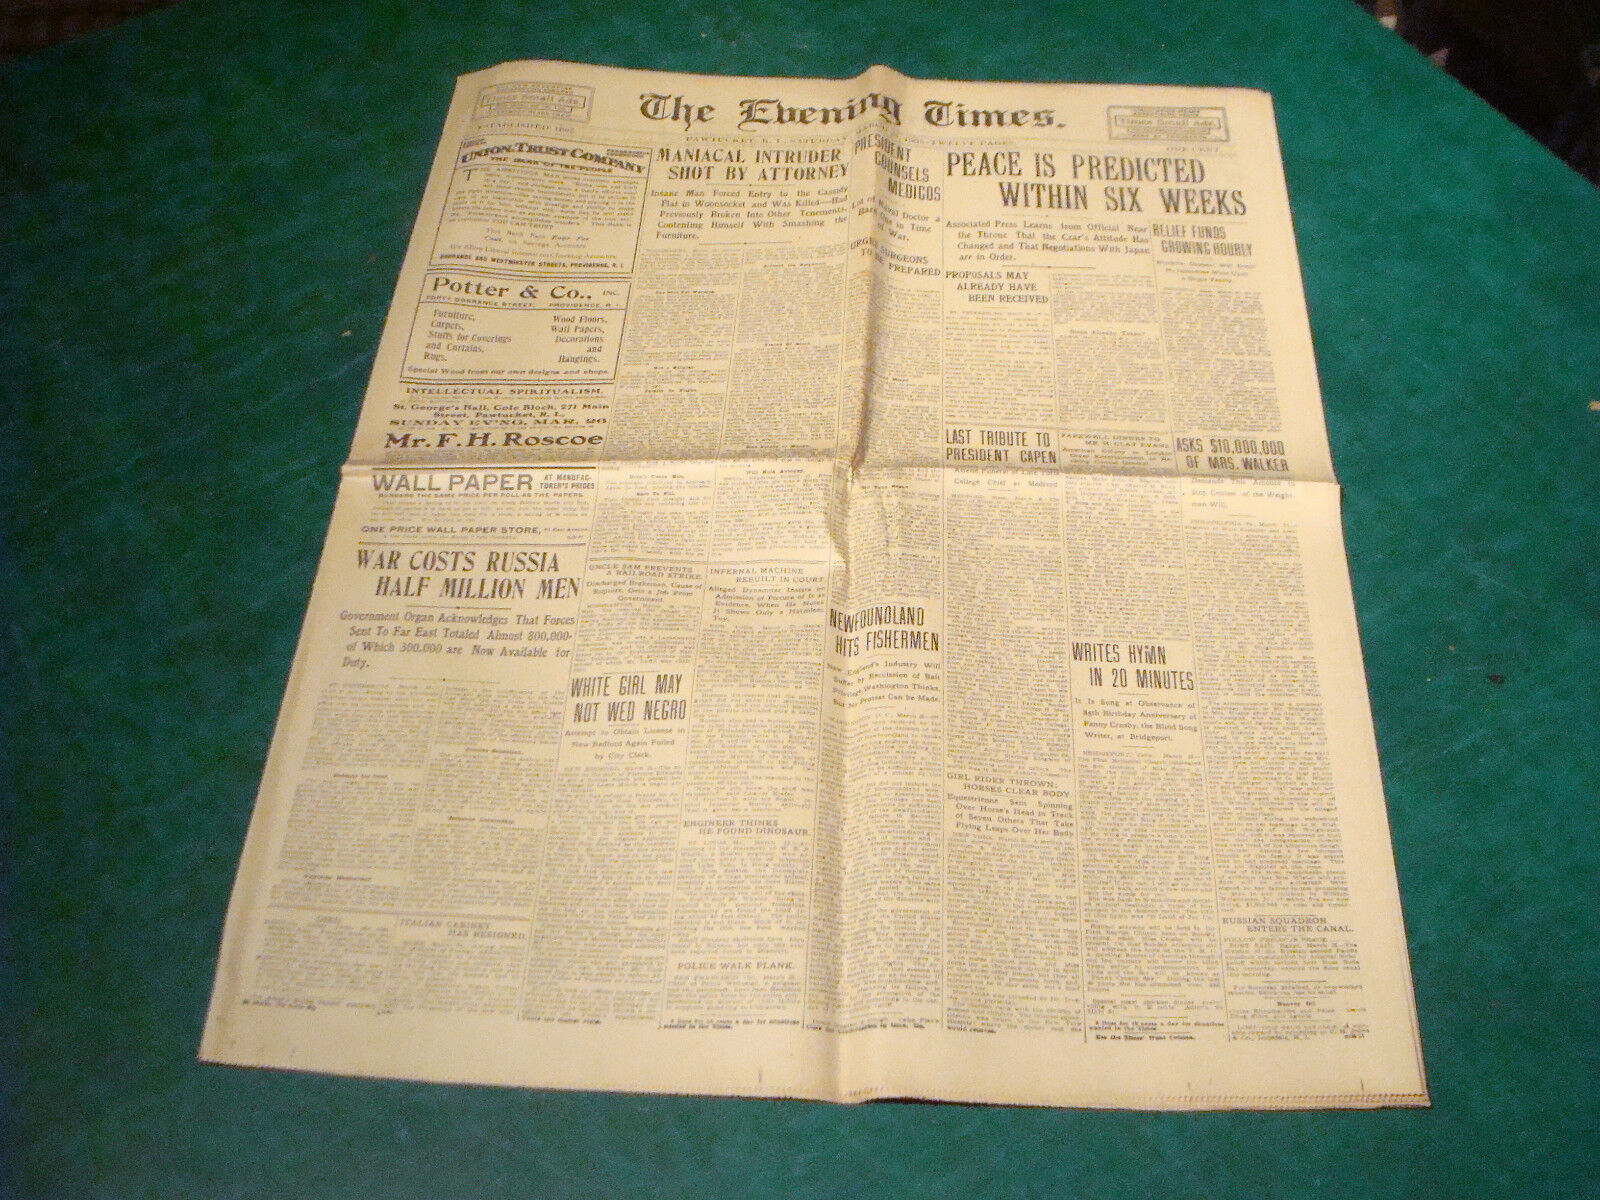 1905 The Evening Times Pawtucket RI - 3-25; PEACE PREDICTED IN 6 WEEKS, etc